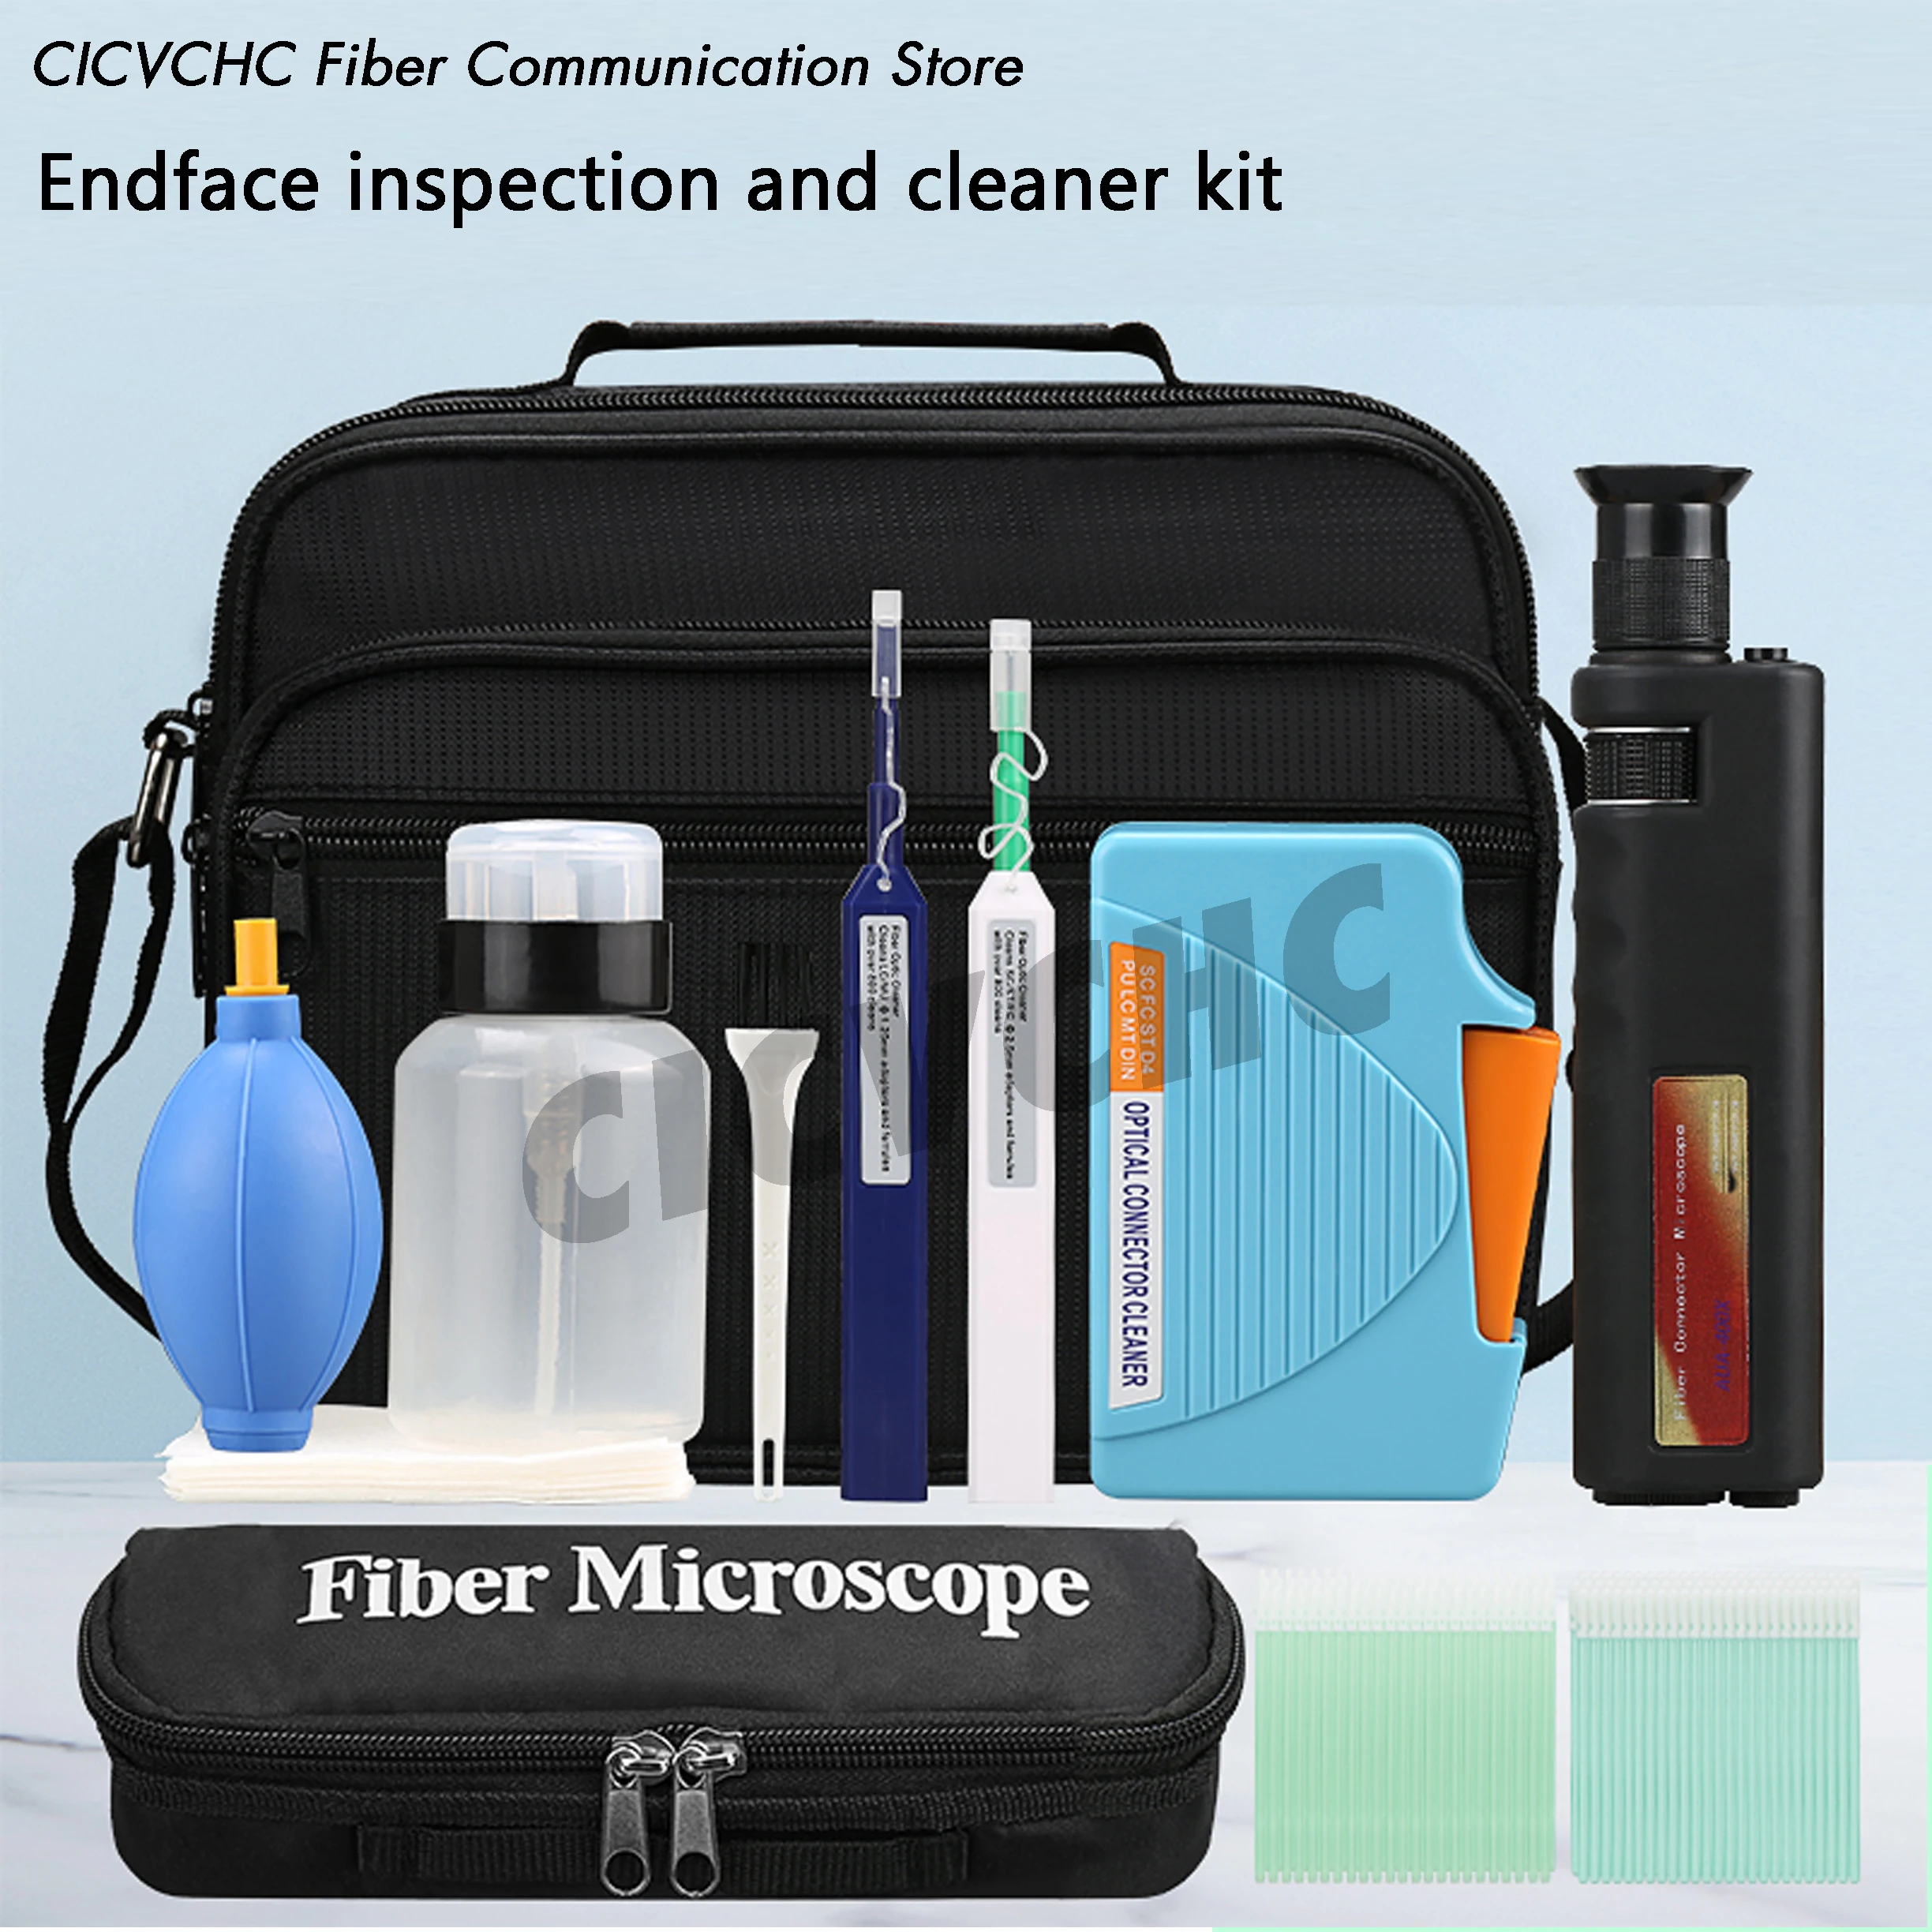 Fiber end-face inspection and cleaner tool kit with 400x fiber microscope (Hand held) 50 400x continous focal av microscope tvl video cmos borescope magnifier handheld endoscope otoscope camera repairing tool